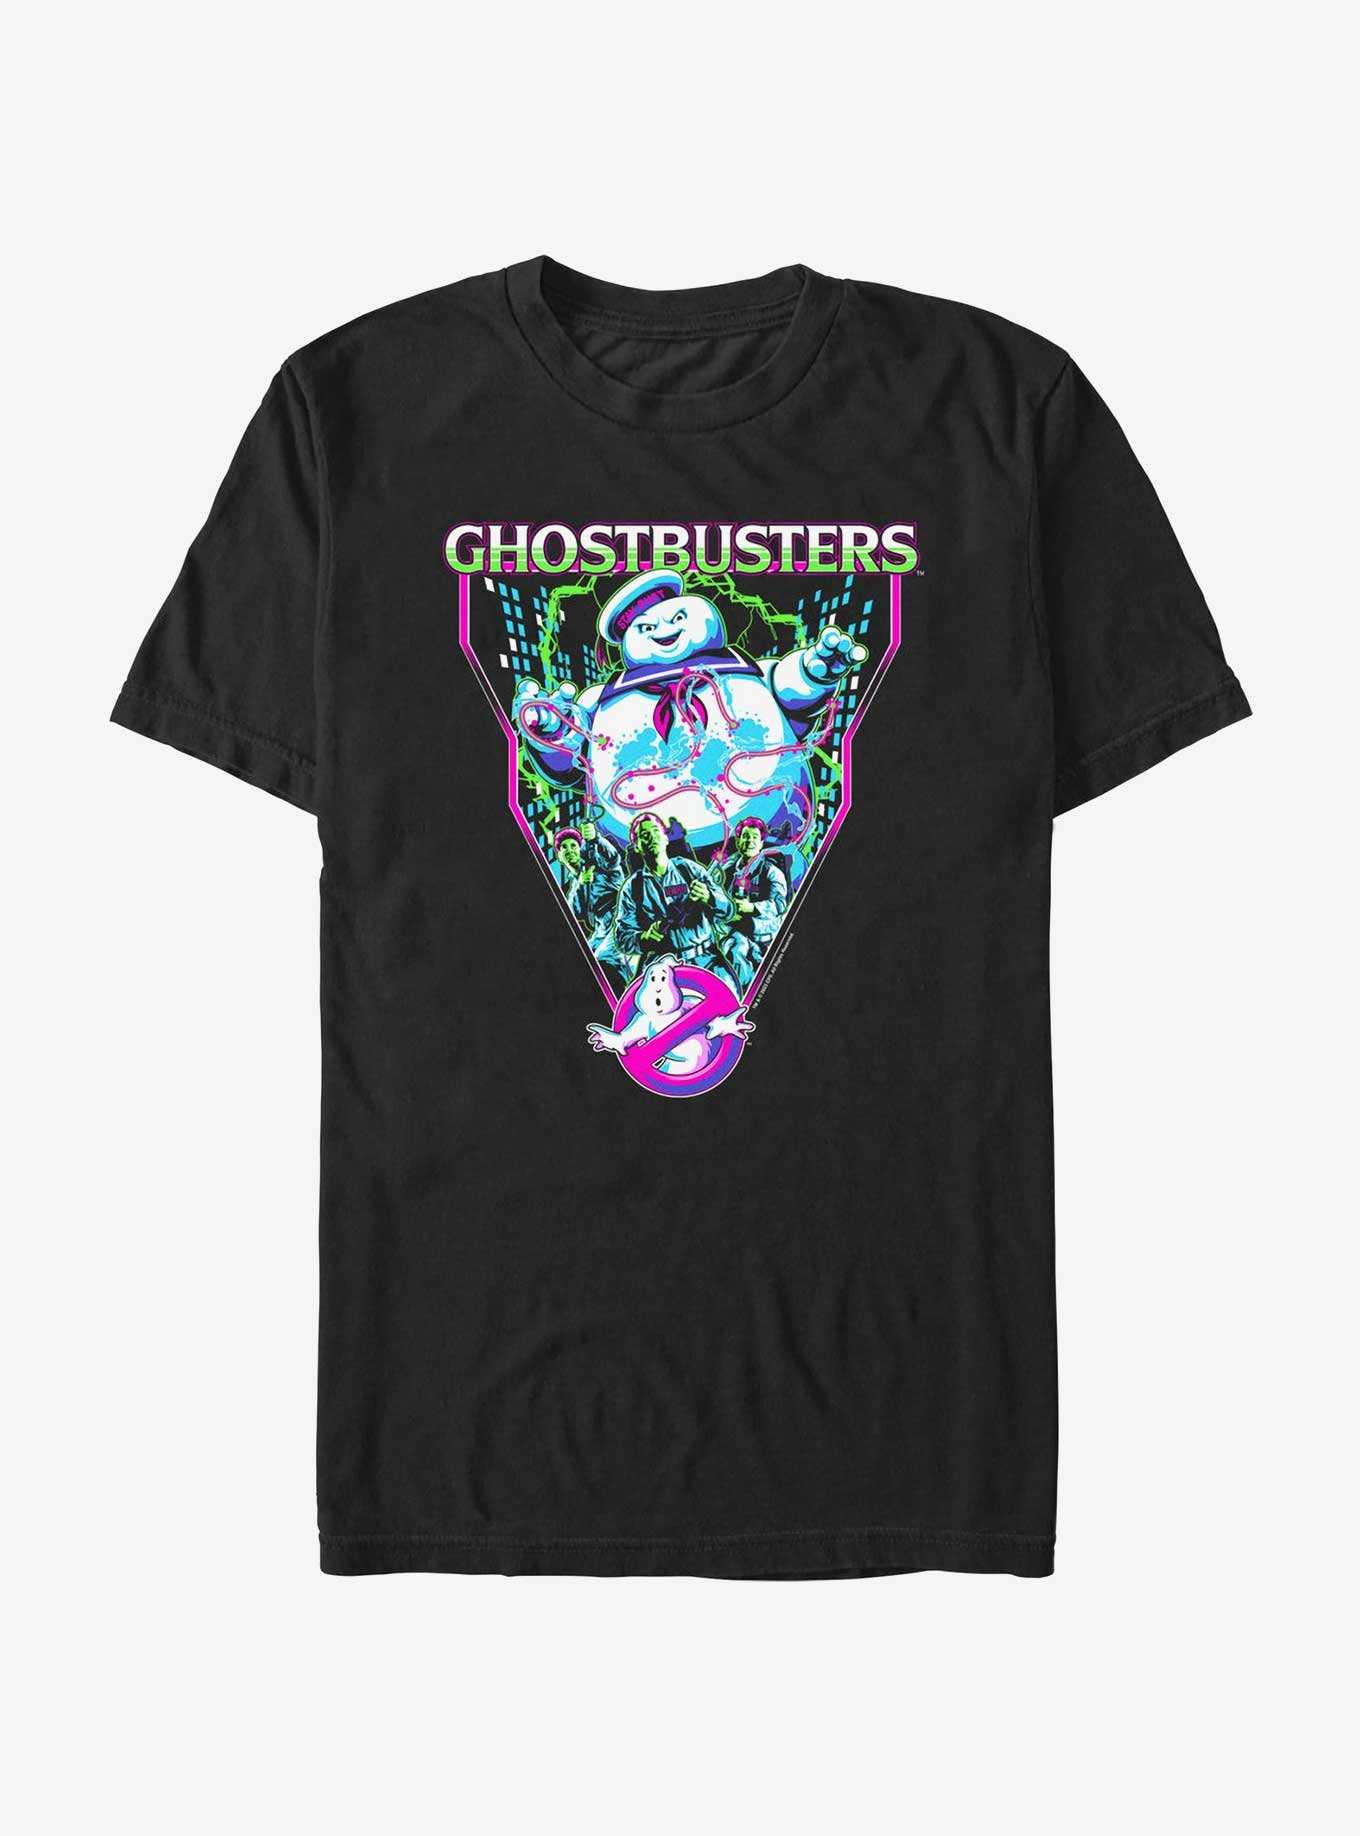 Ghostbusters Stay-Puft Marshmallow Man Ghostblasters T-Shirt, , hi-res